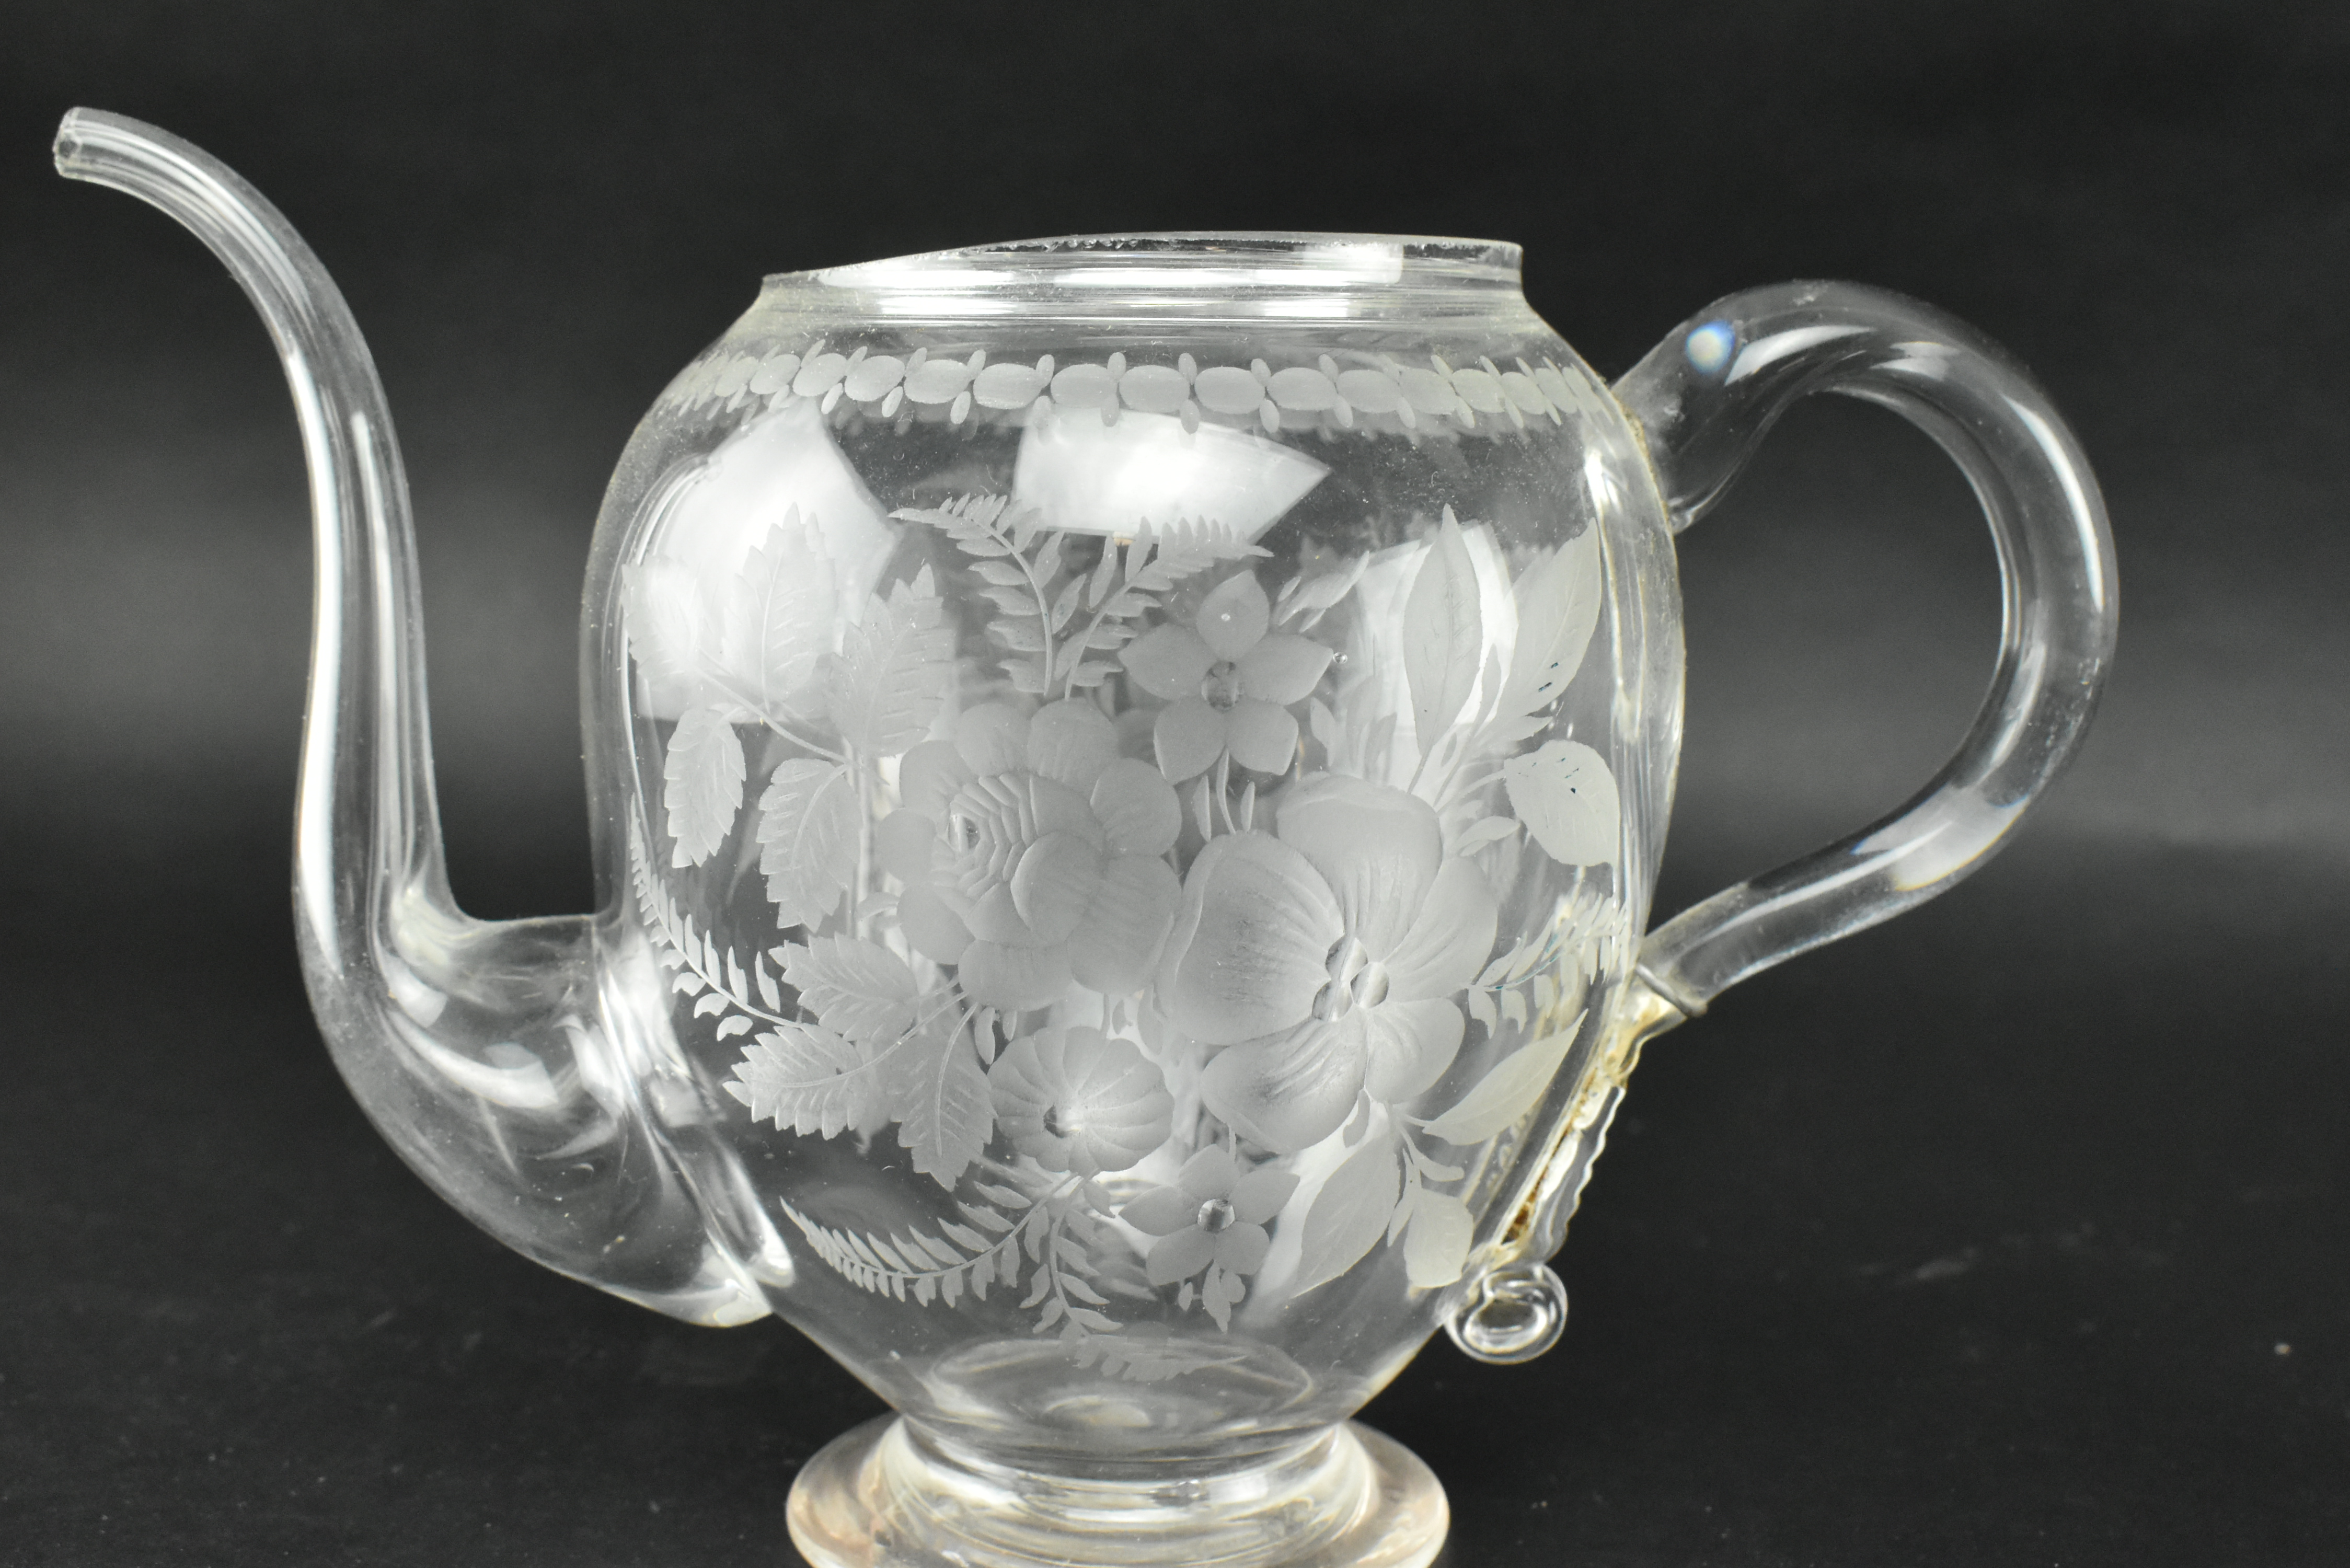 VICTORIAN CIRCA 1860 ENGRAVED GLASS TEAPOT AND COVER - Image 10 of 12